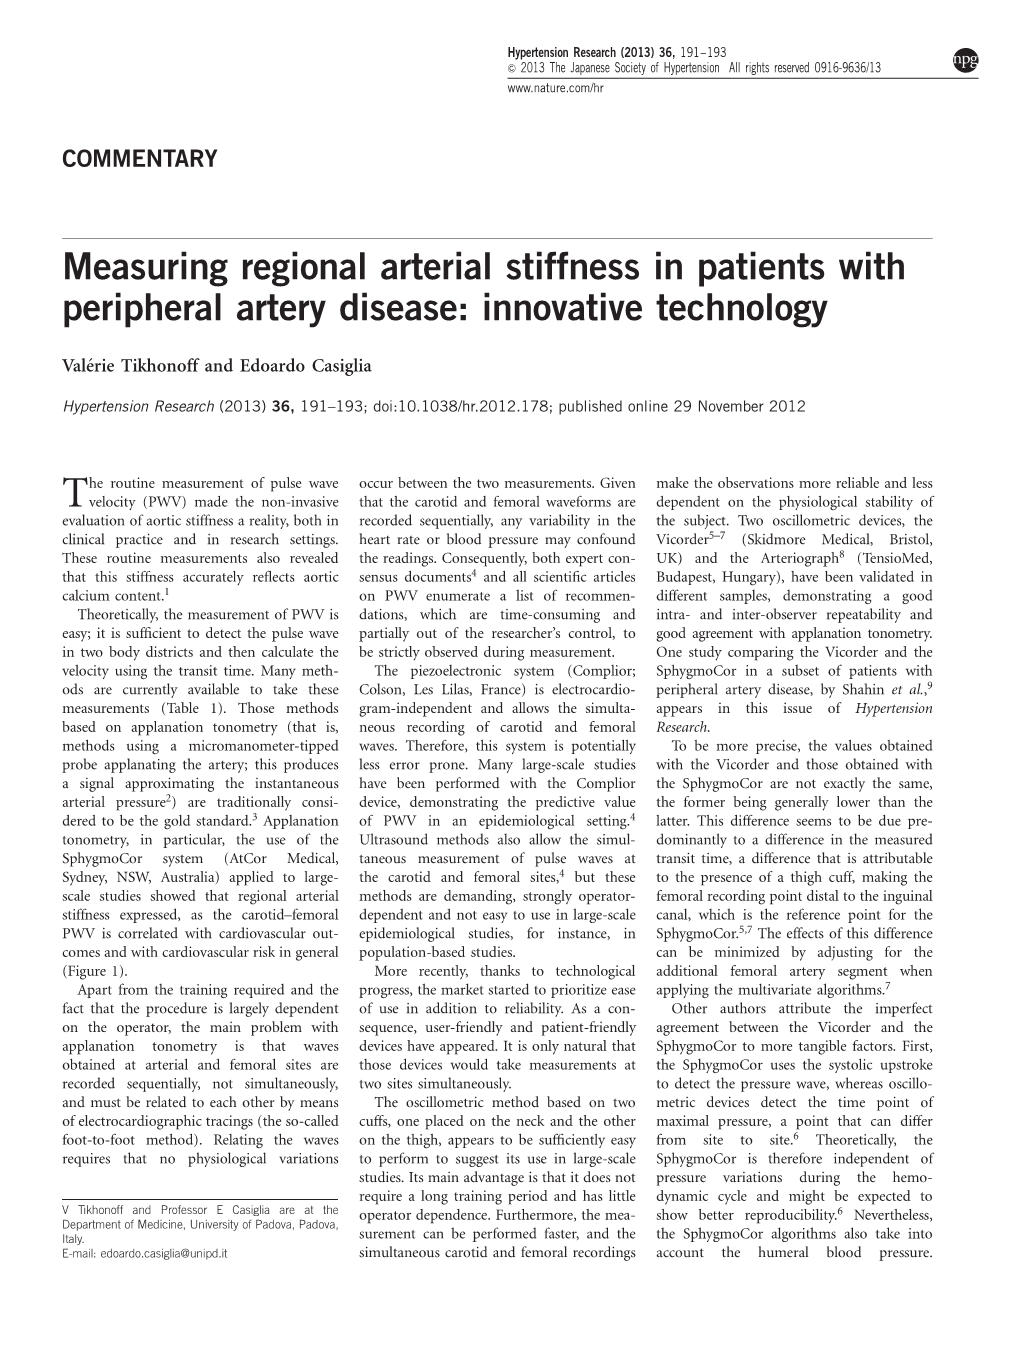 Measuring Regional Arterial Stiffness in Patients with Peripheral Artery Disease: Innovative Technology